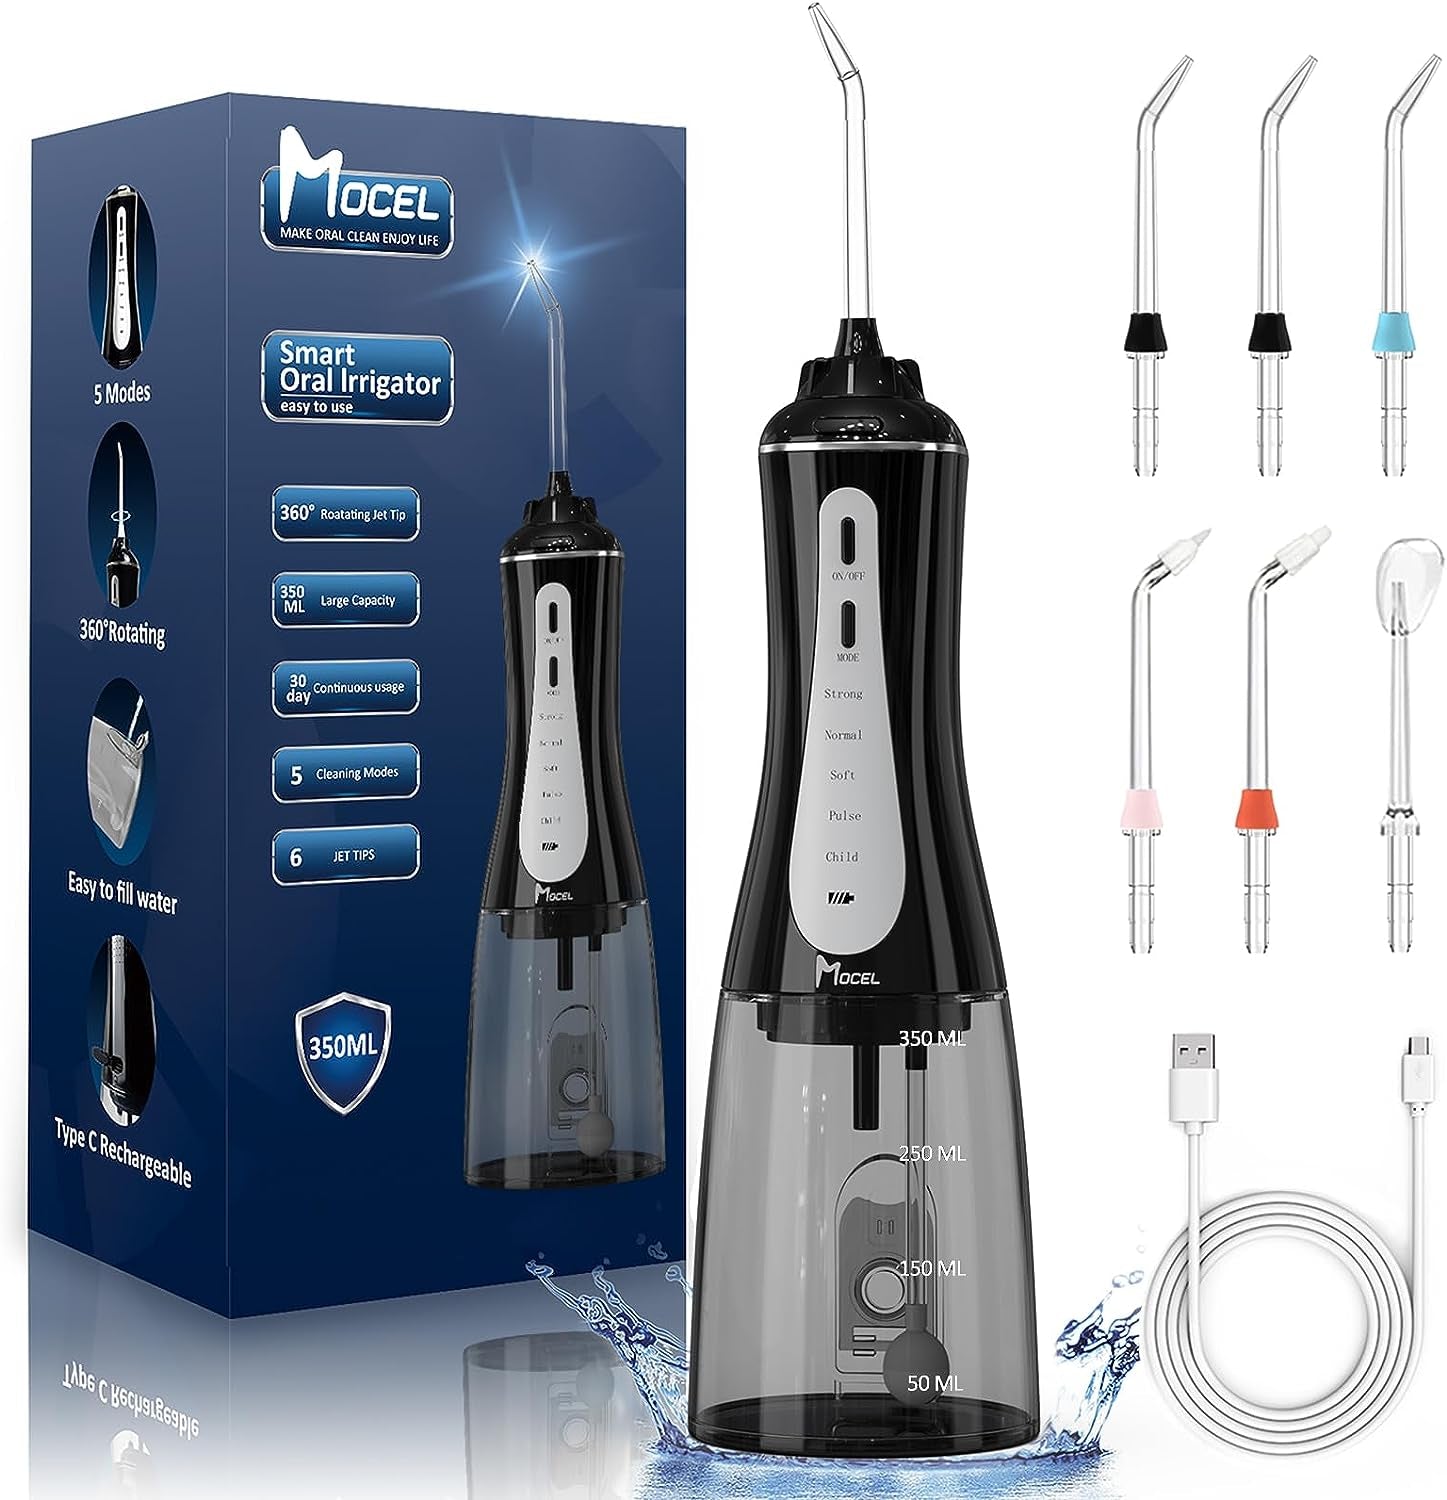 Water Dental Flosser Oral Irrigator with 5 Modes, 350Ml Cordless Water Teeth Cleaner Pick 6 Tips, IPX7 Waterproof Rechargeable Portable Powerful Battery for Travel & Home Braces & Bridges Care